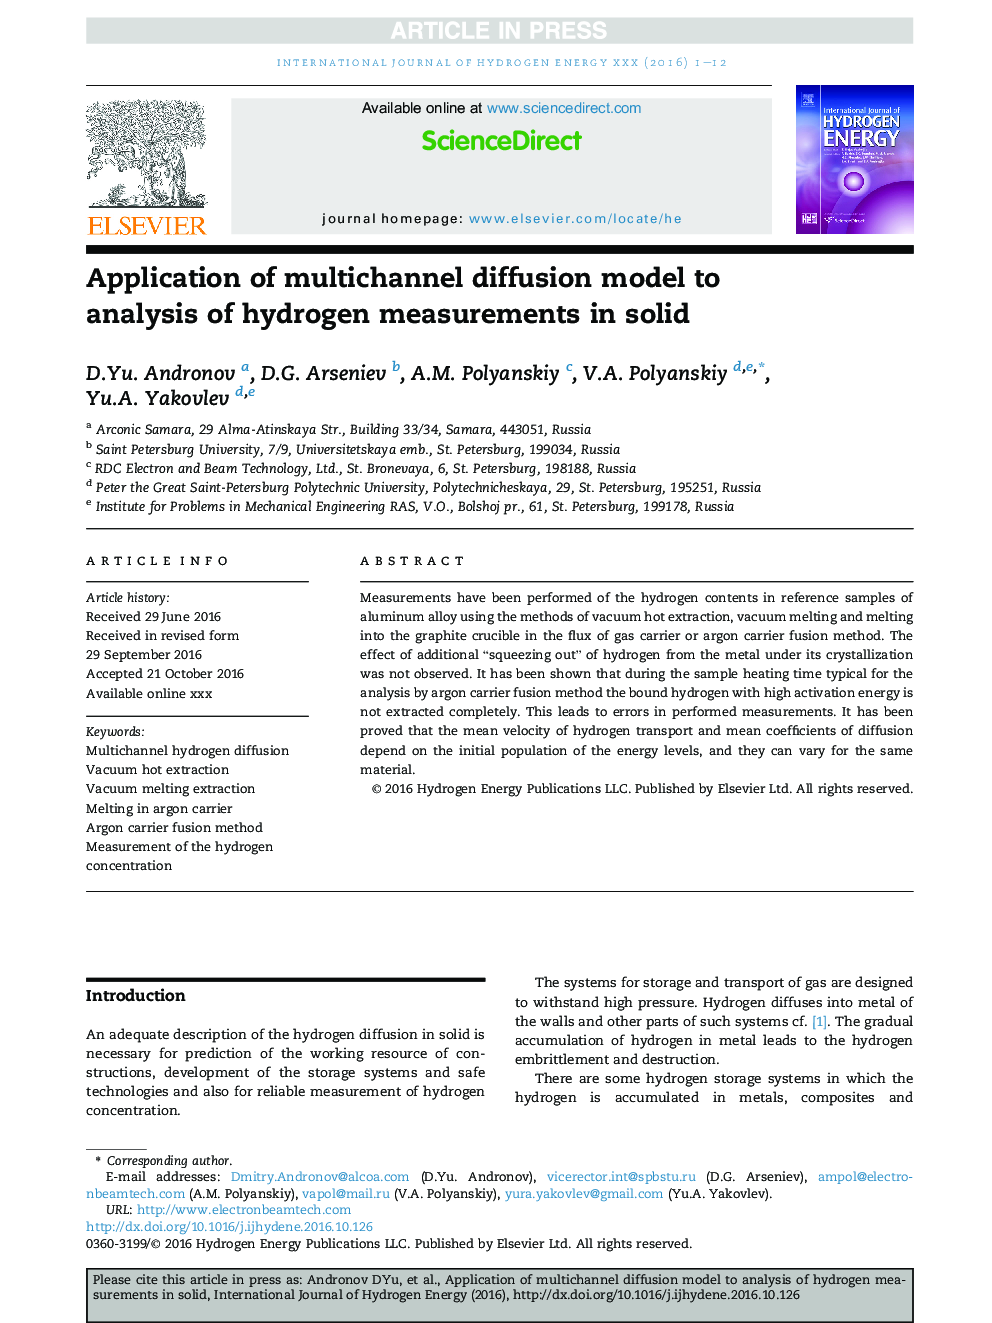 Application of multichannel diffusion model to analysis of hydrogen measurements in solid